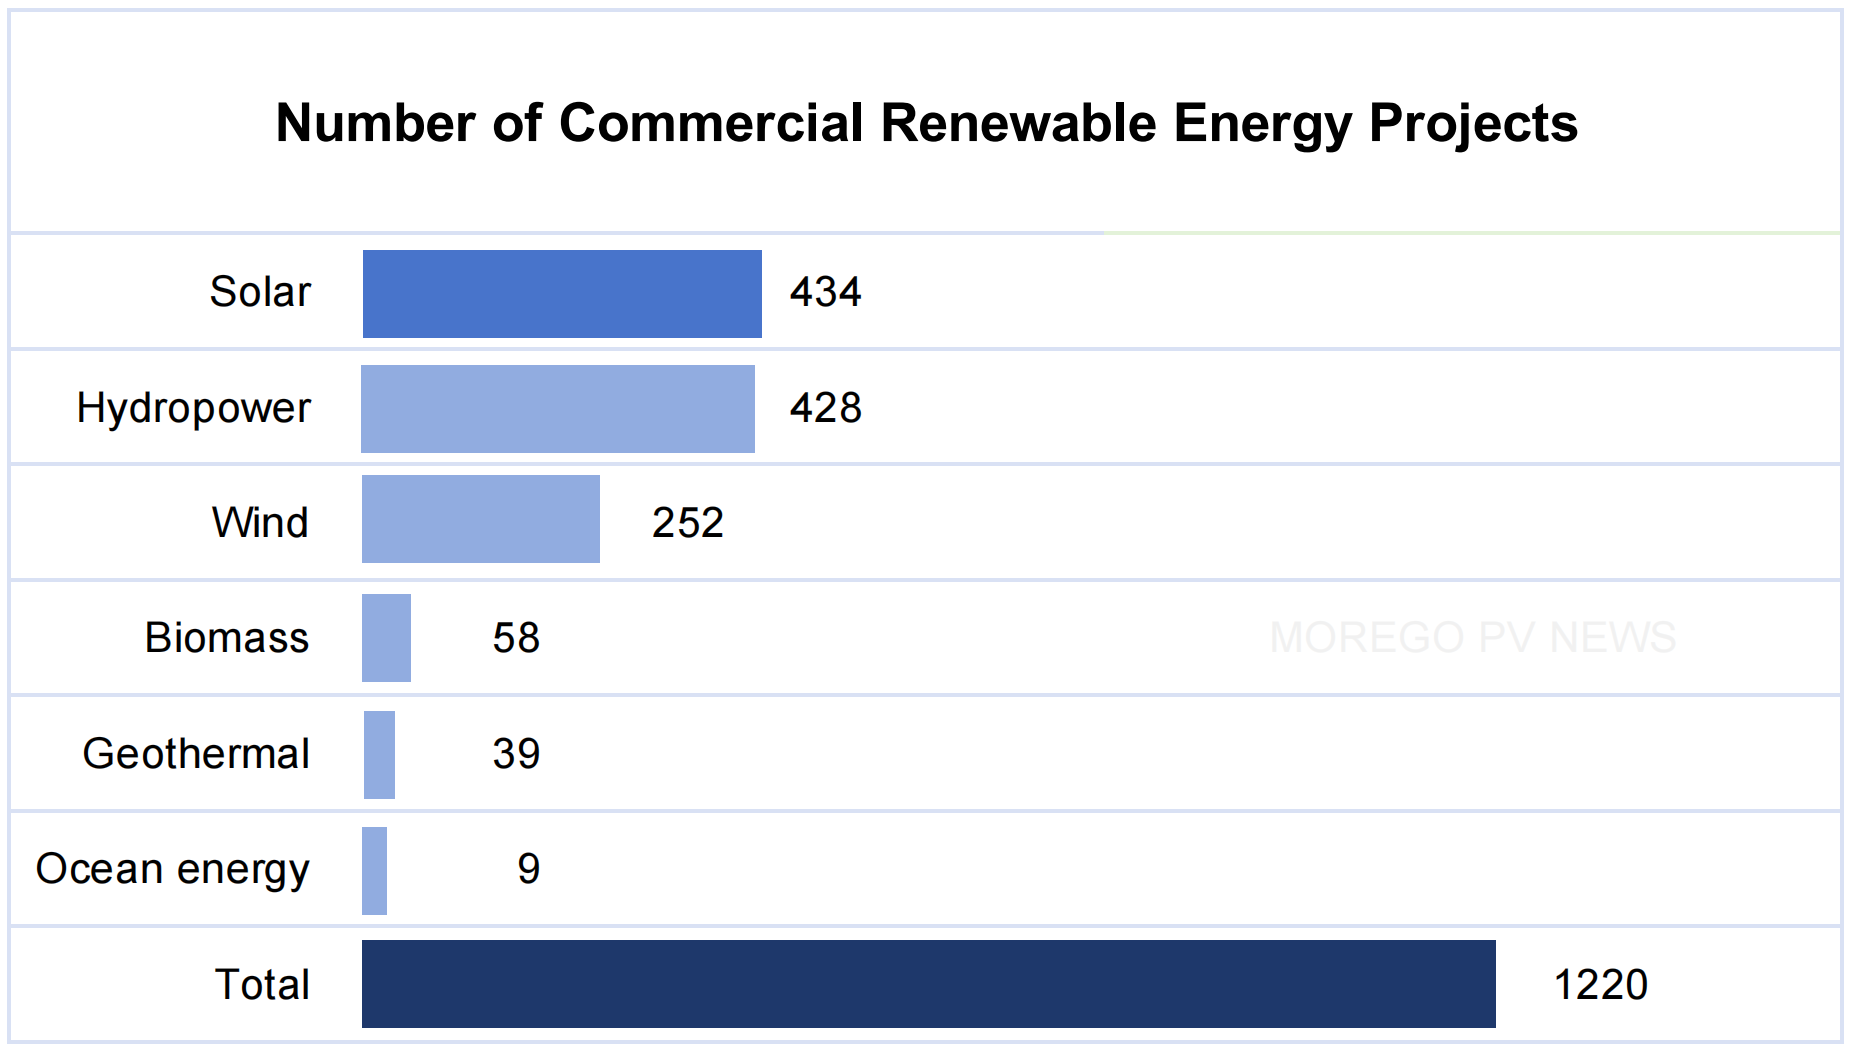 Number of Commercial Renewable Energy Projects